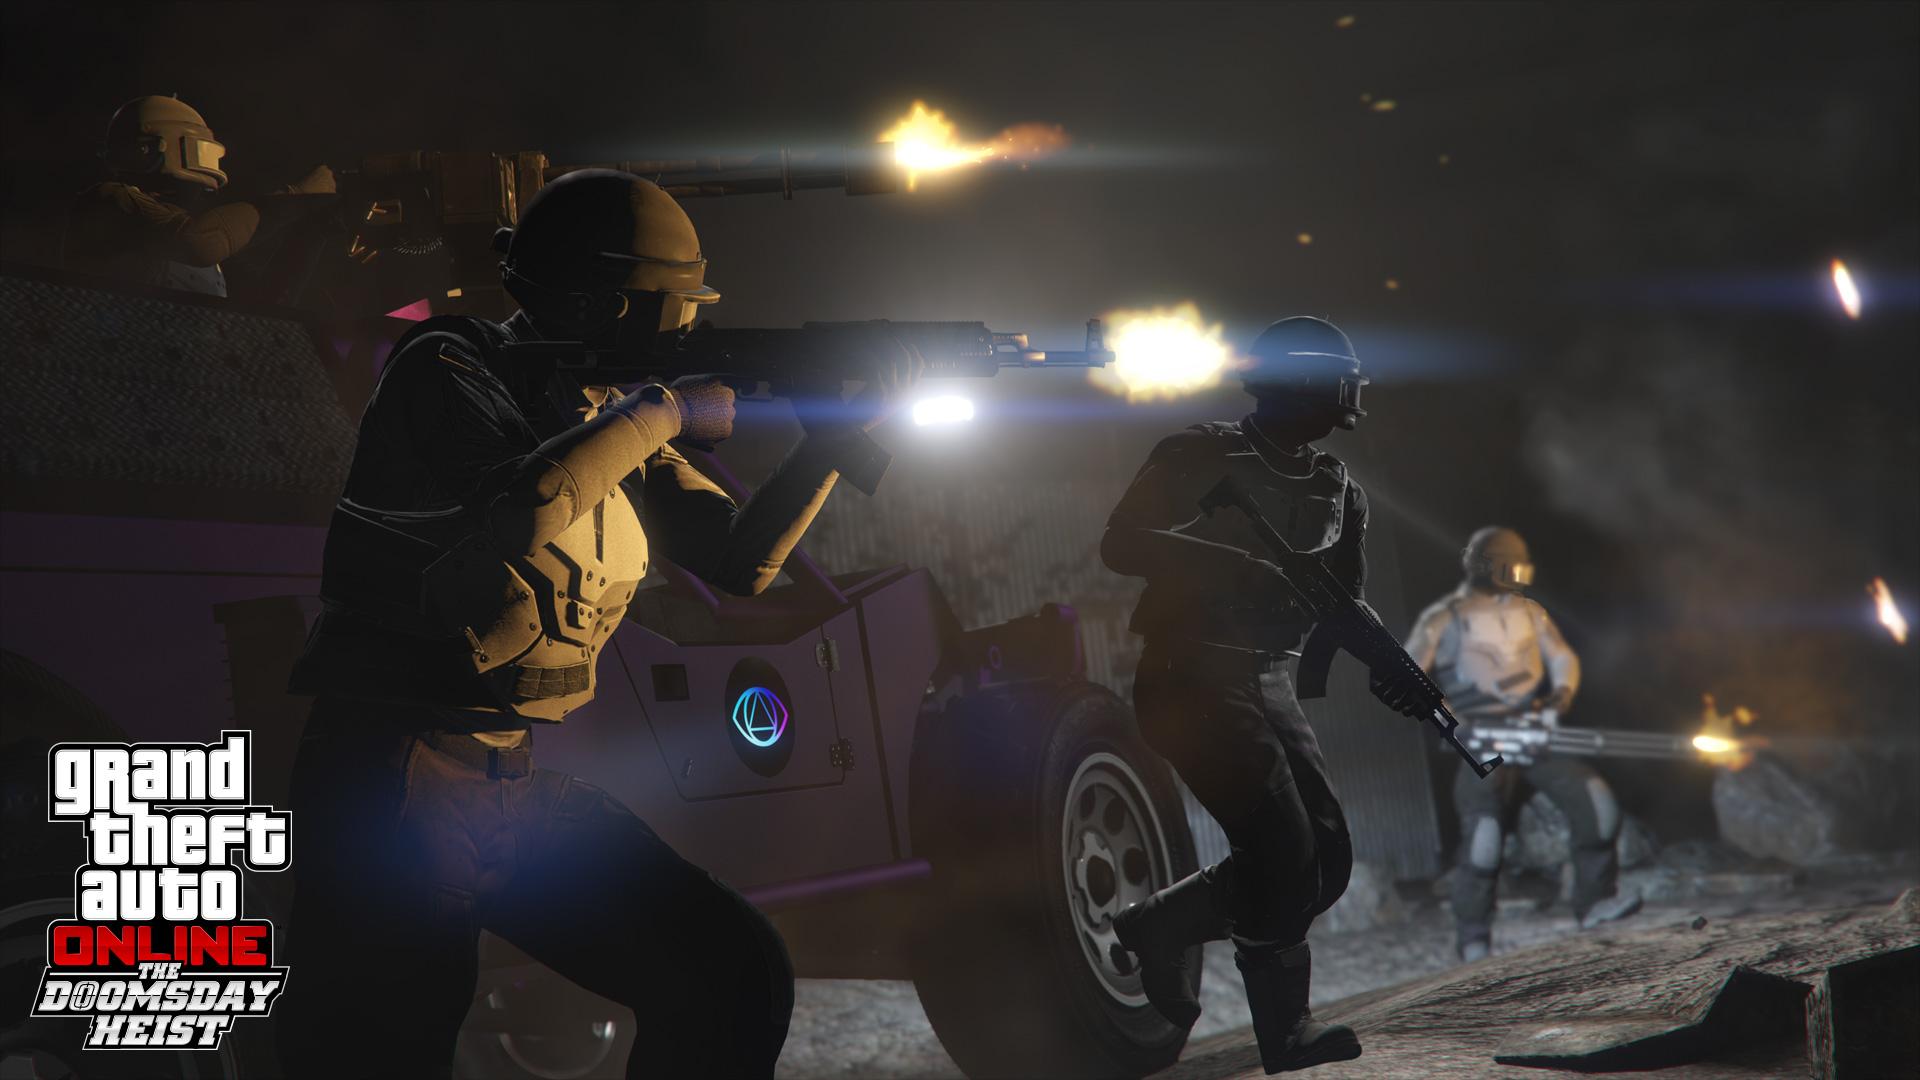 Screenshot №2 from game Grand Theft Auto V